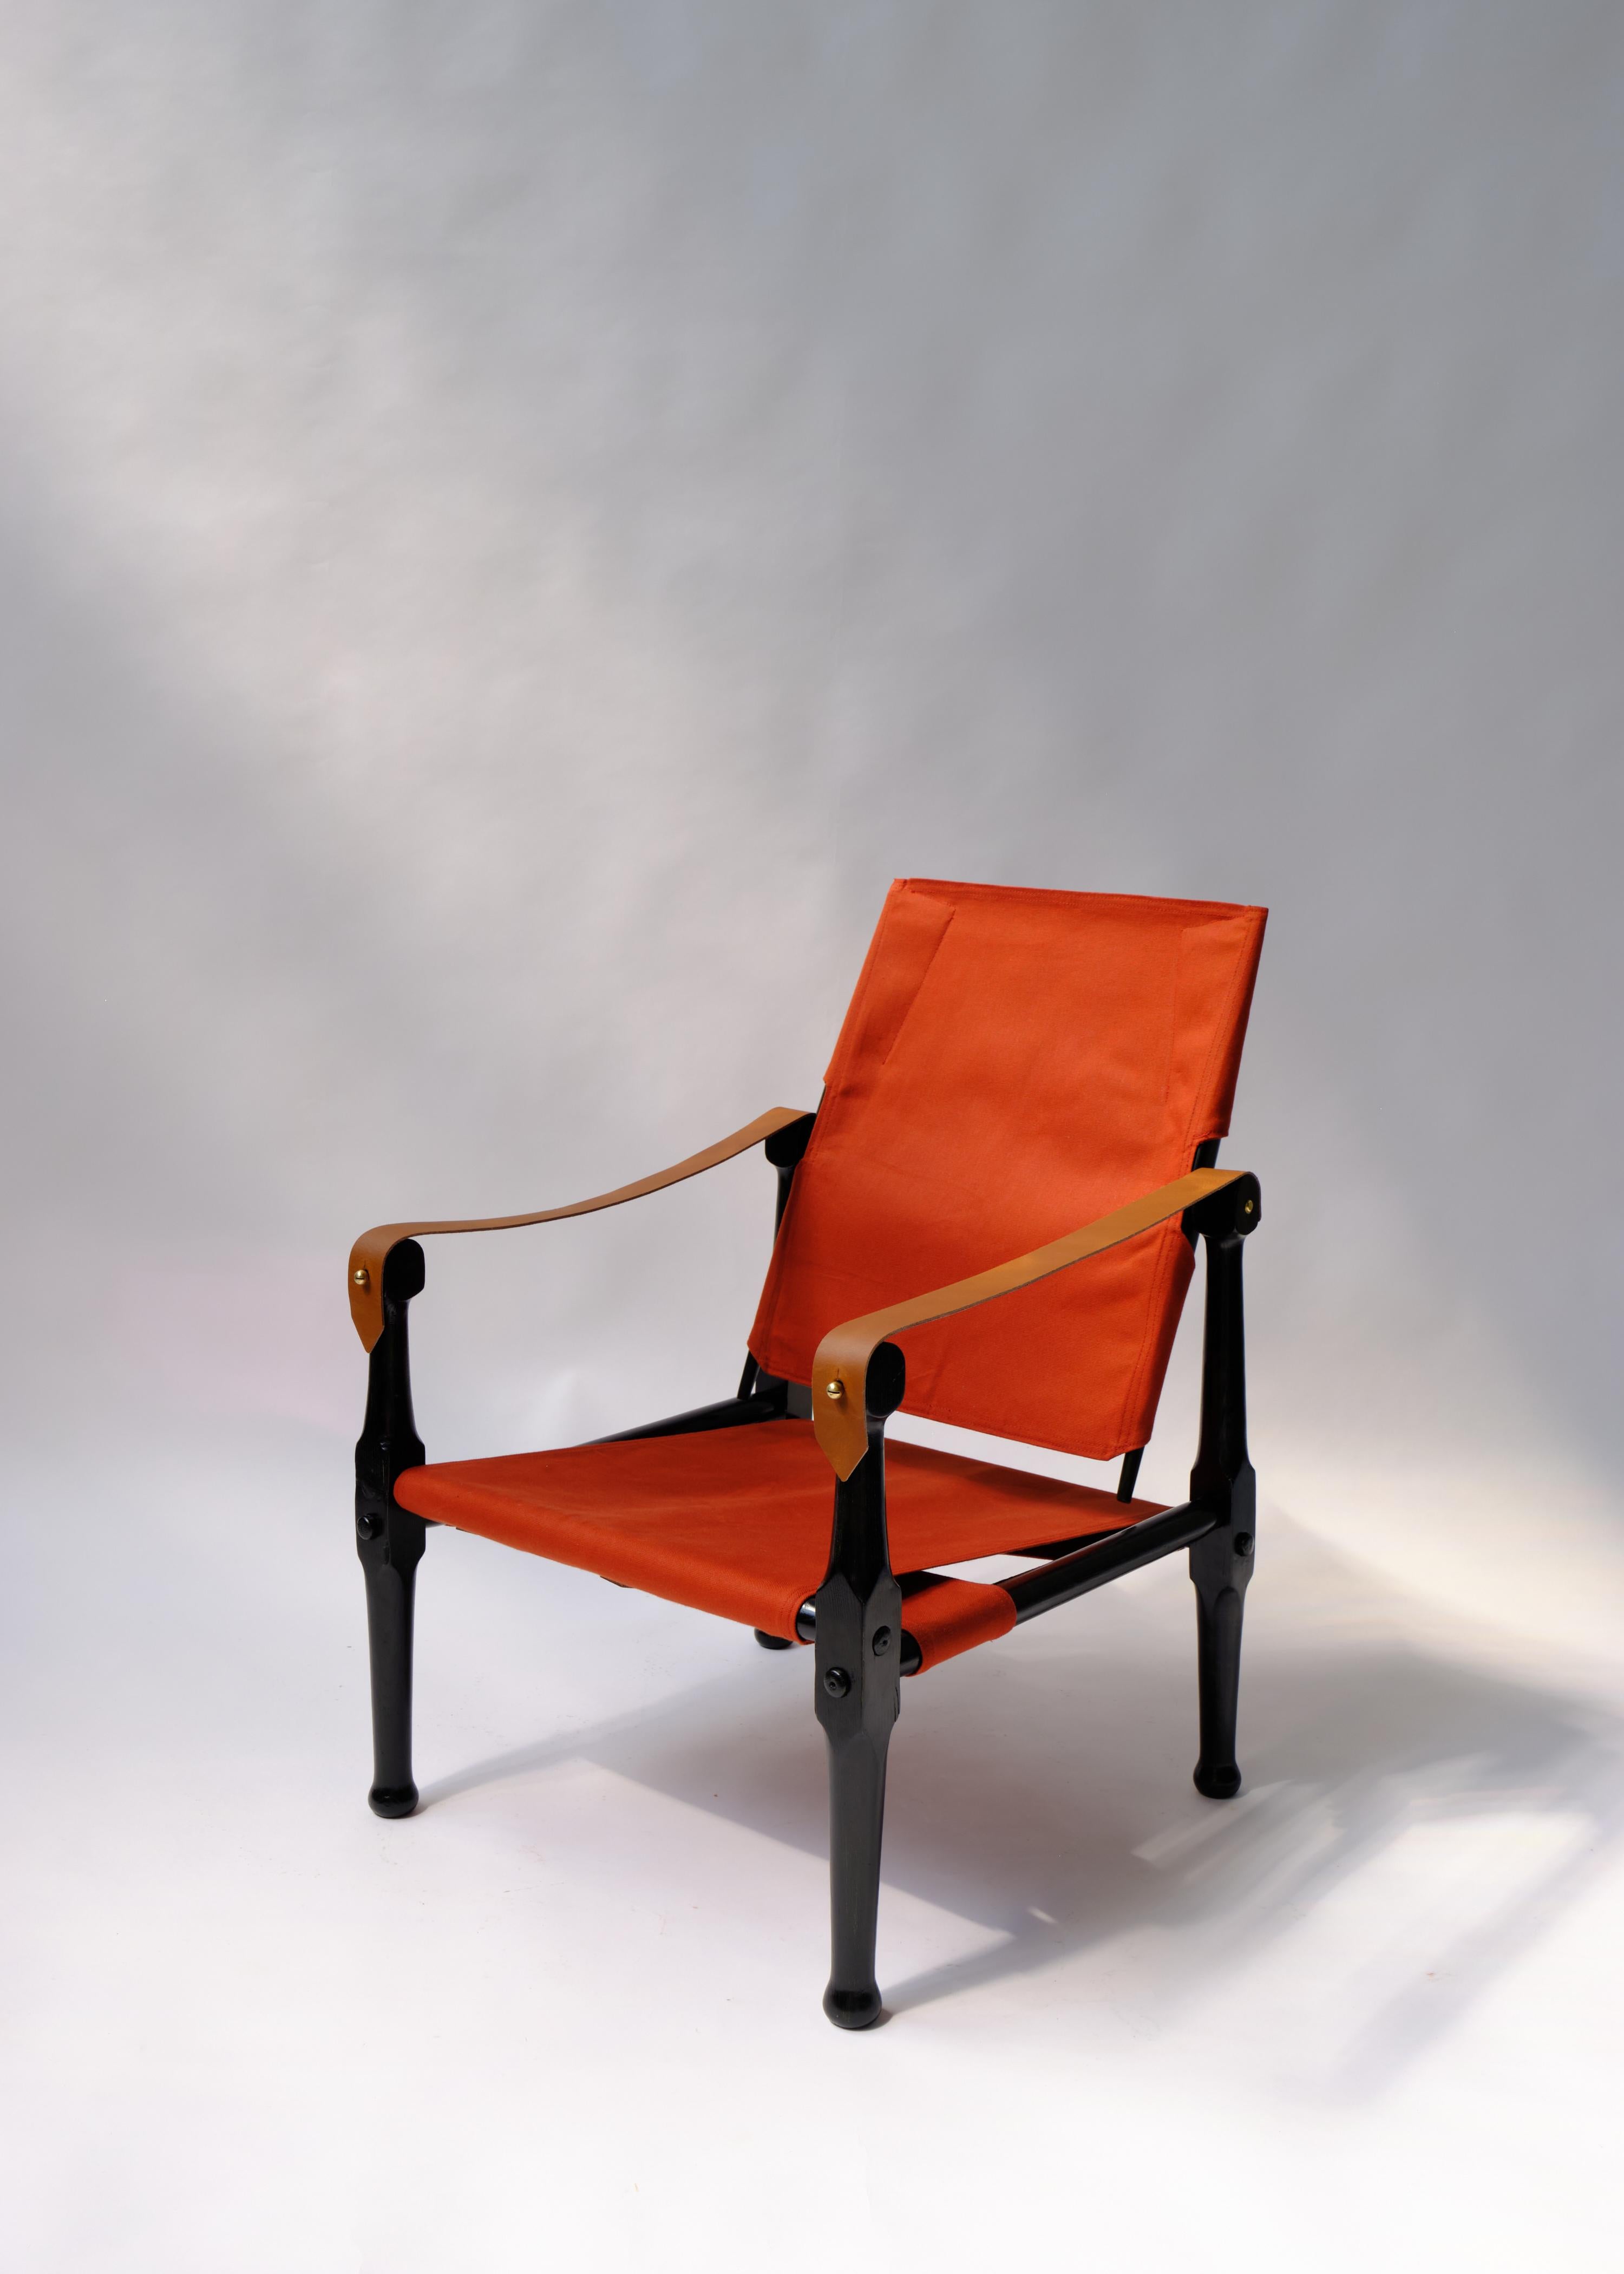 The simple joints and slung design of the Roorkhee campaign chair were the inspiration for some of the most iconic chairs of the 20th century including Breuer’s Wassily, Le Corbusier’s Baasculant, Magistretti’s 905 and Wilhelm Bofinger’s Farmers